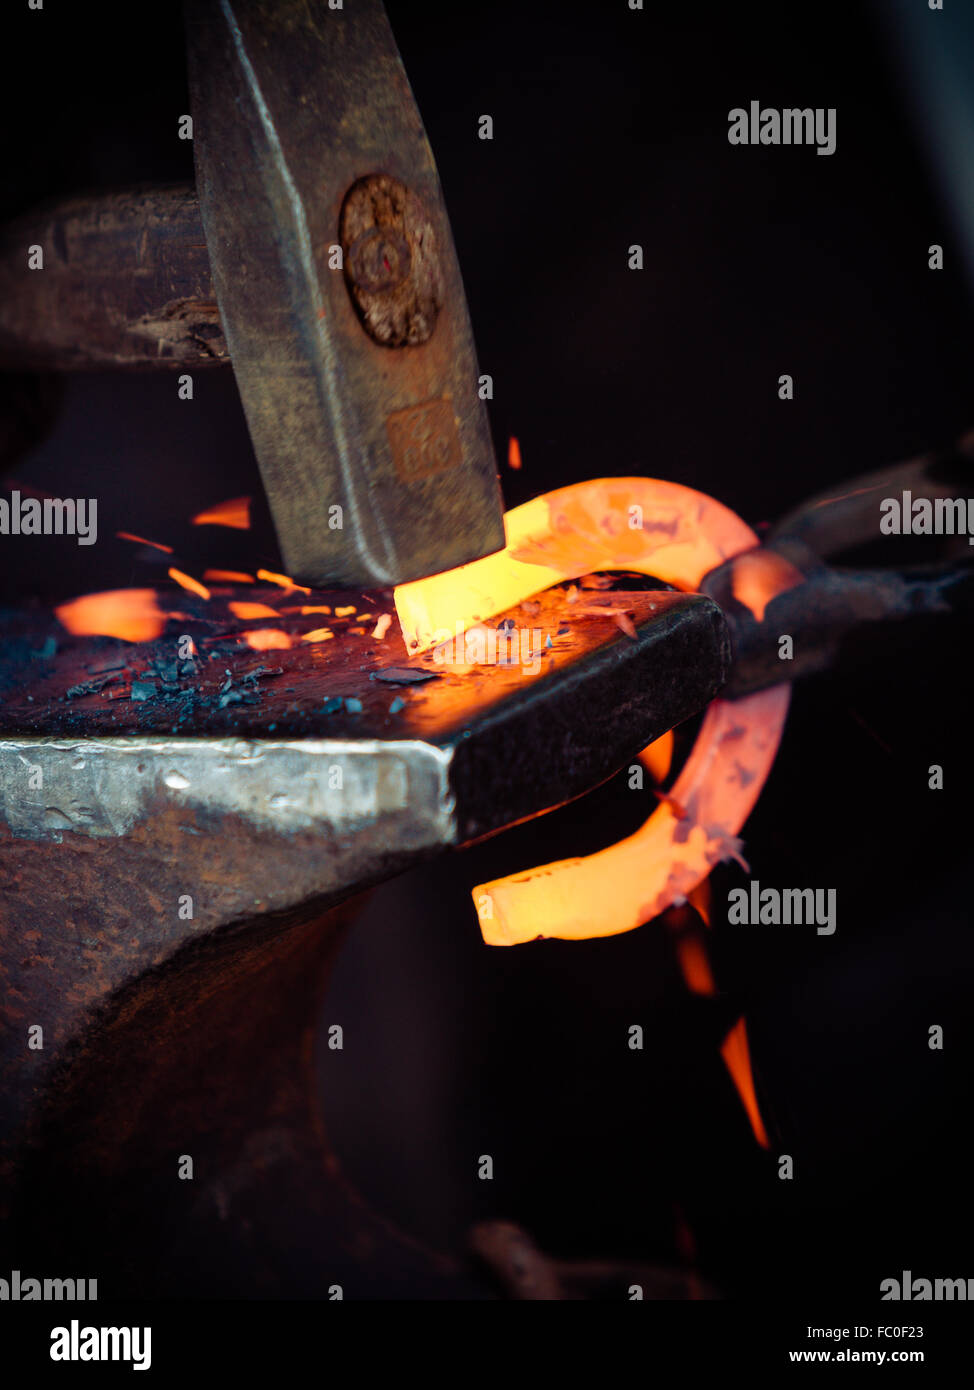 Hammering glowing steel - to strike while the iron is hot. Stock Photo